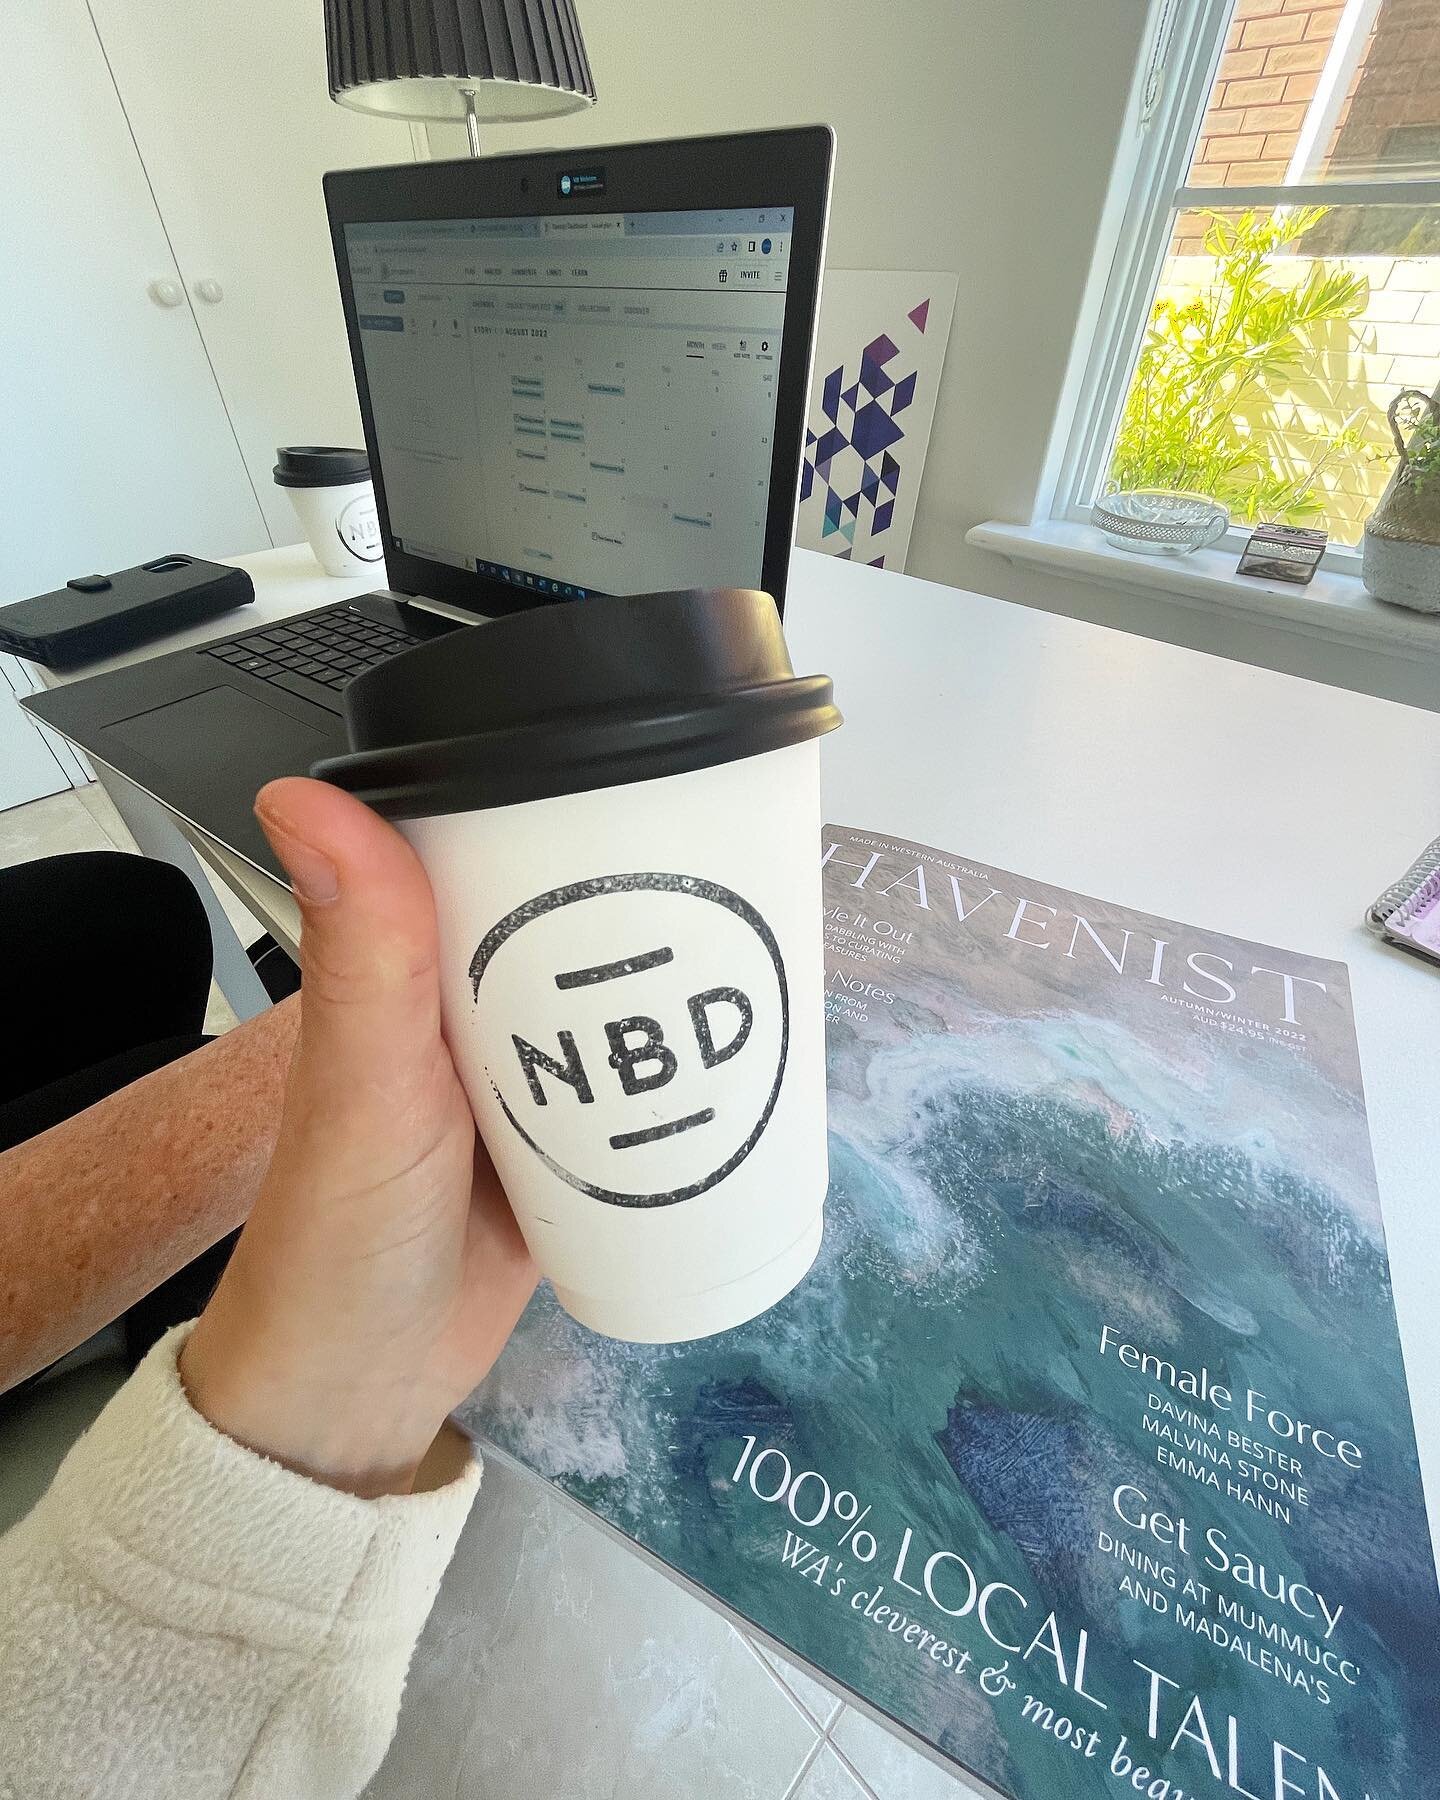 Kicking some social media goals 🥅✅ with @grangeperth and a little help from our friends at @northbeachdeliwa! 🤪☕️

Congrats to Julia for continually pushing the boundaries and developing her SM strategy! We love seeing you grow each and every month